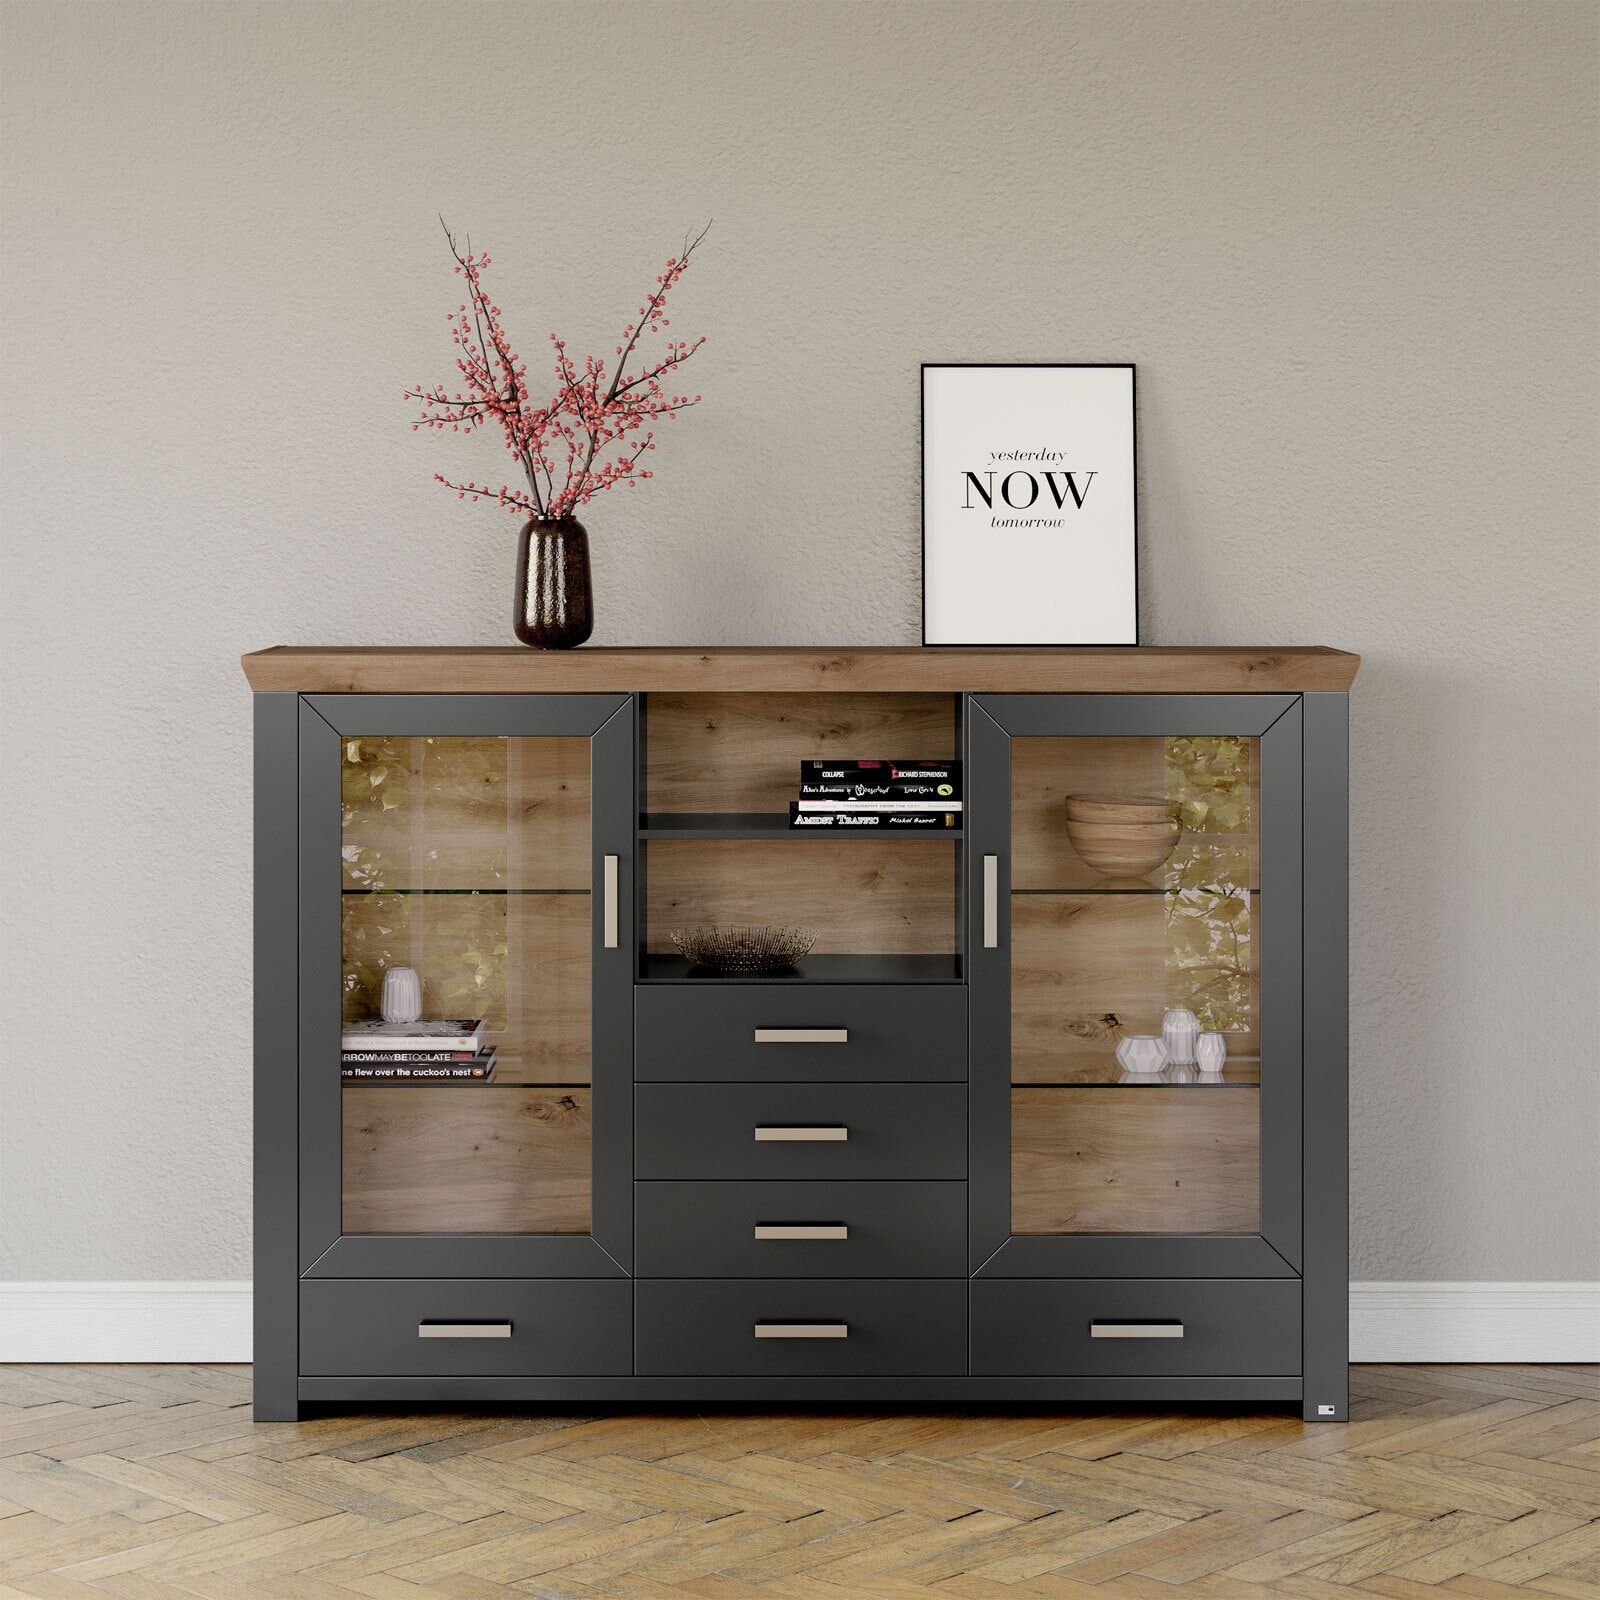 set one by Musterring Highboard YORK 56 anthrazit /Eiche Artisan